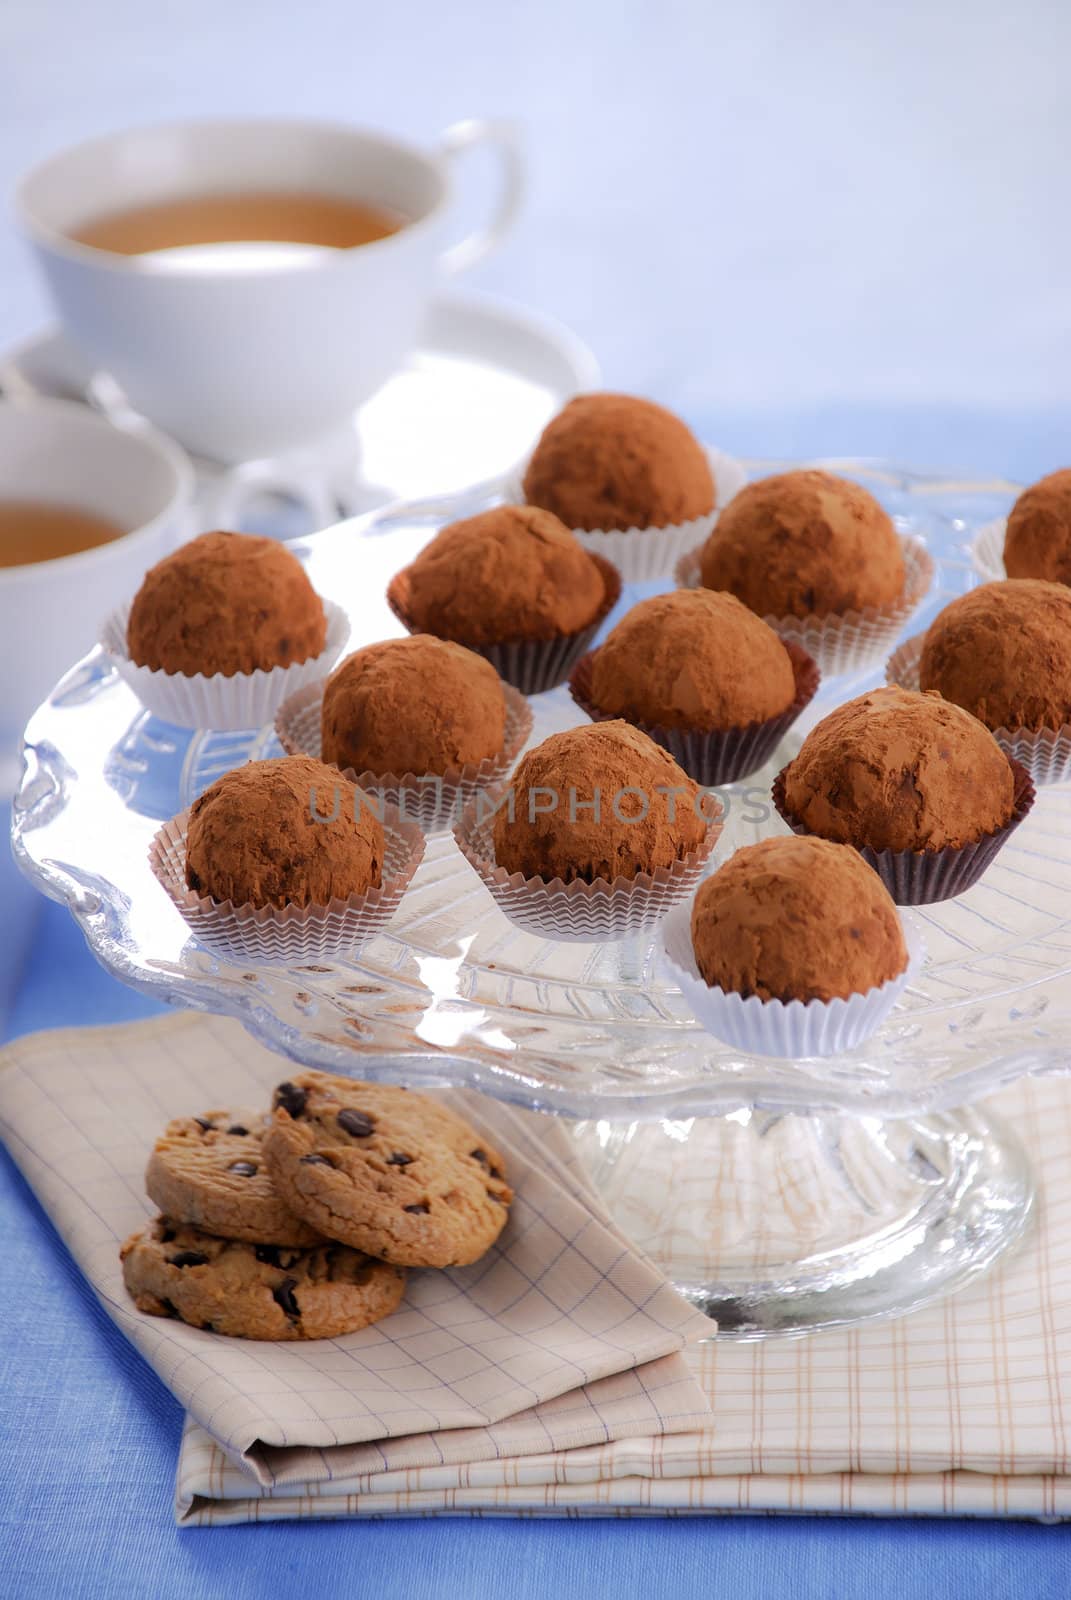 choc ball and cookie chocolates chips